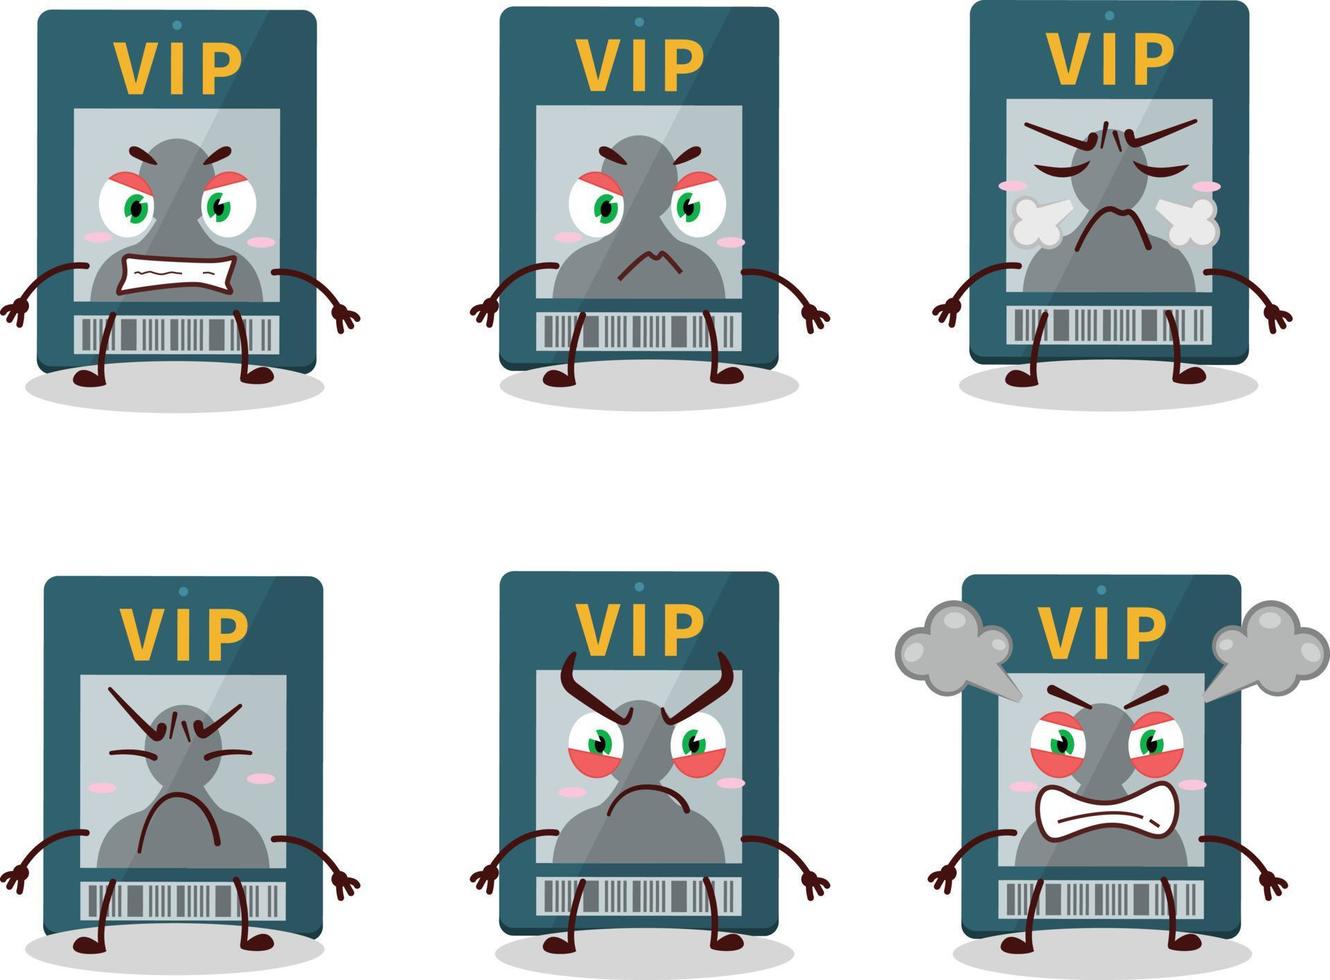 Vip card cartoon character with various angry expressions vector